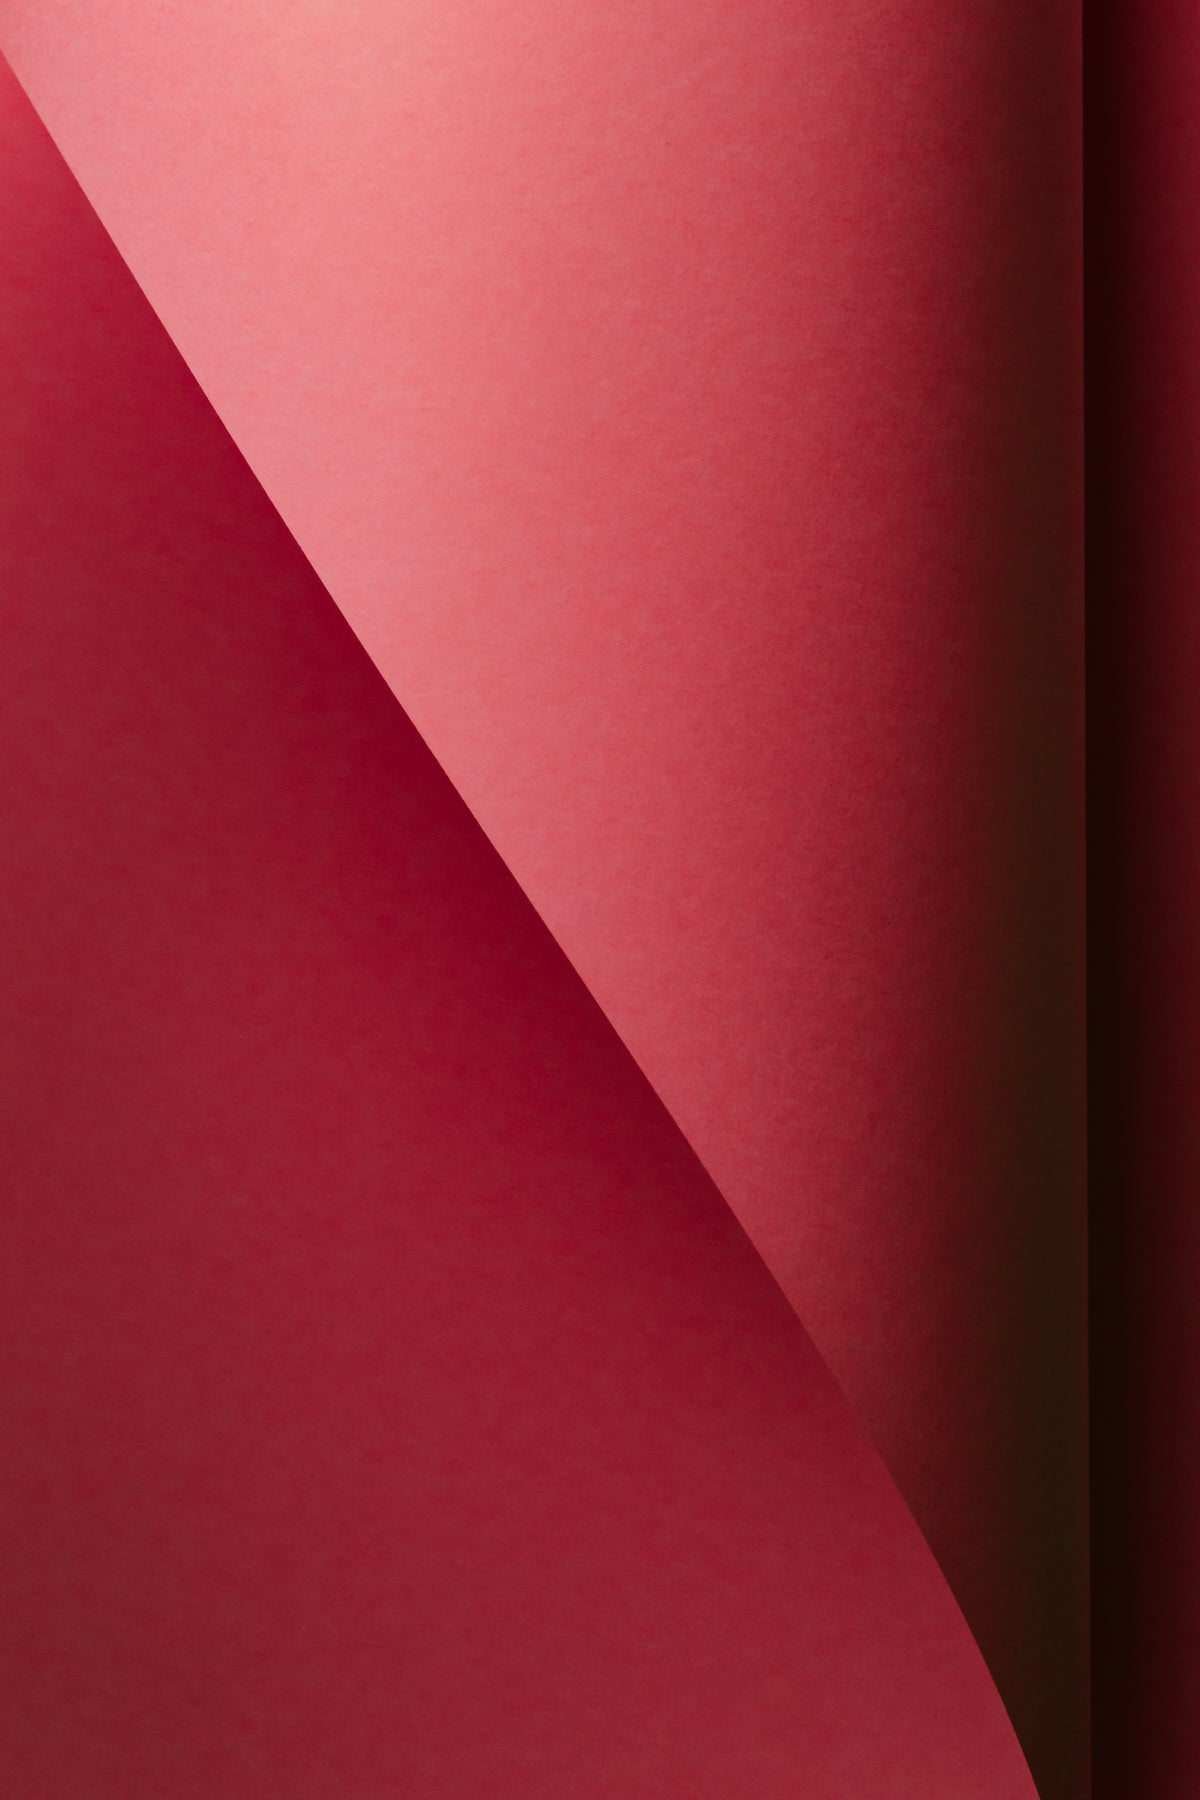 red paper curves to make an abstract gradient